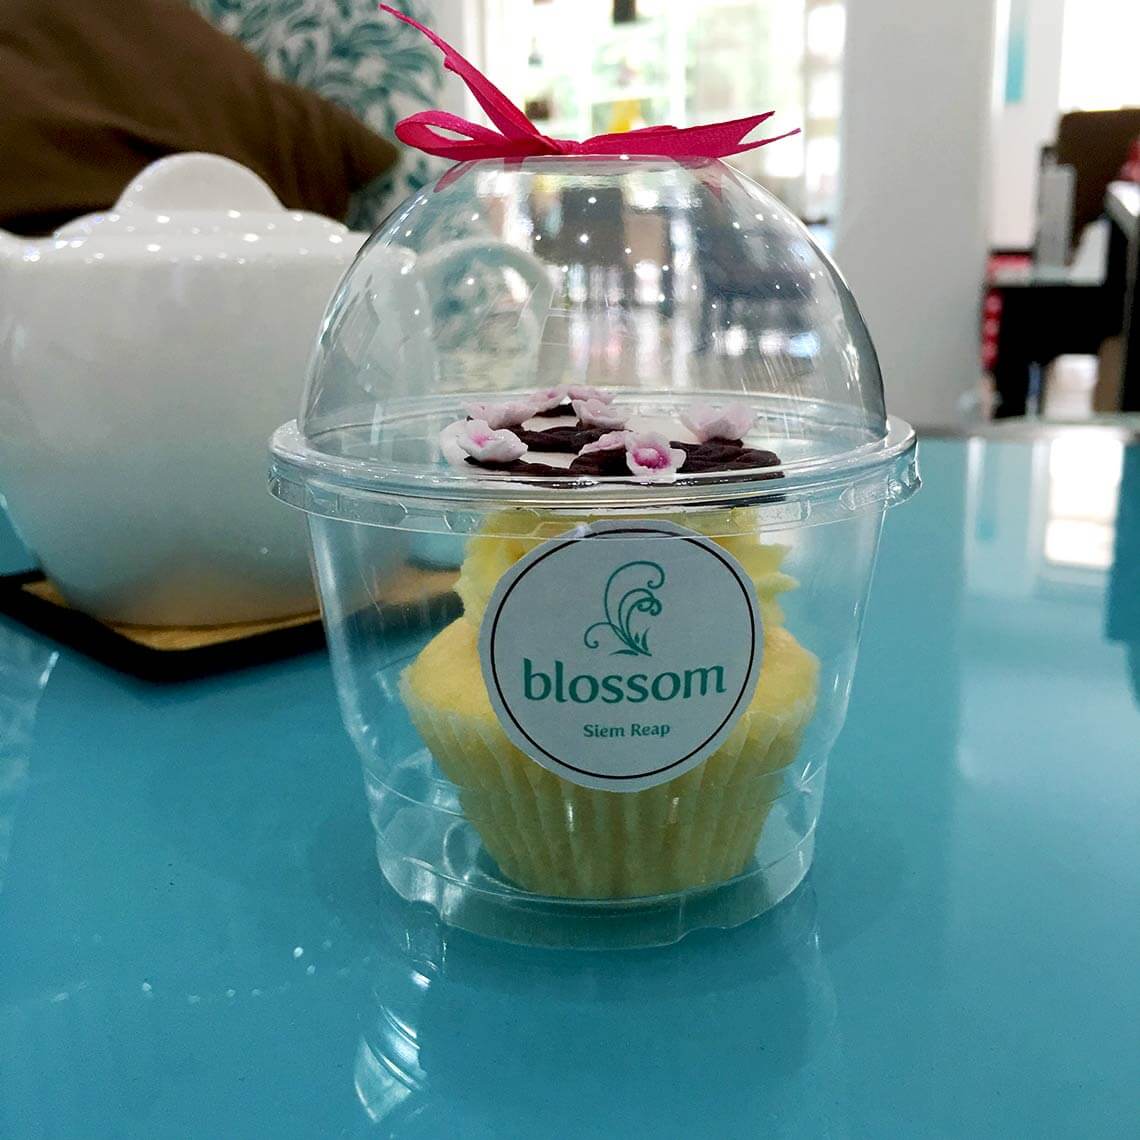 Cupcake To Go - Bloom Cafe, Siem Reap